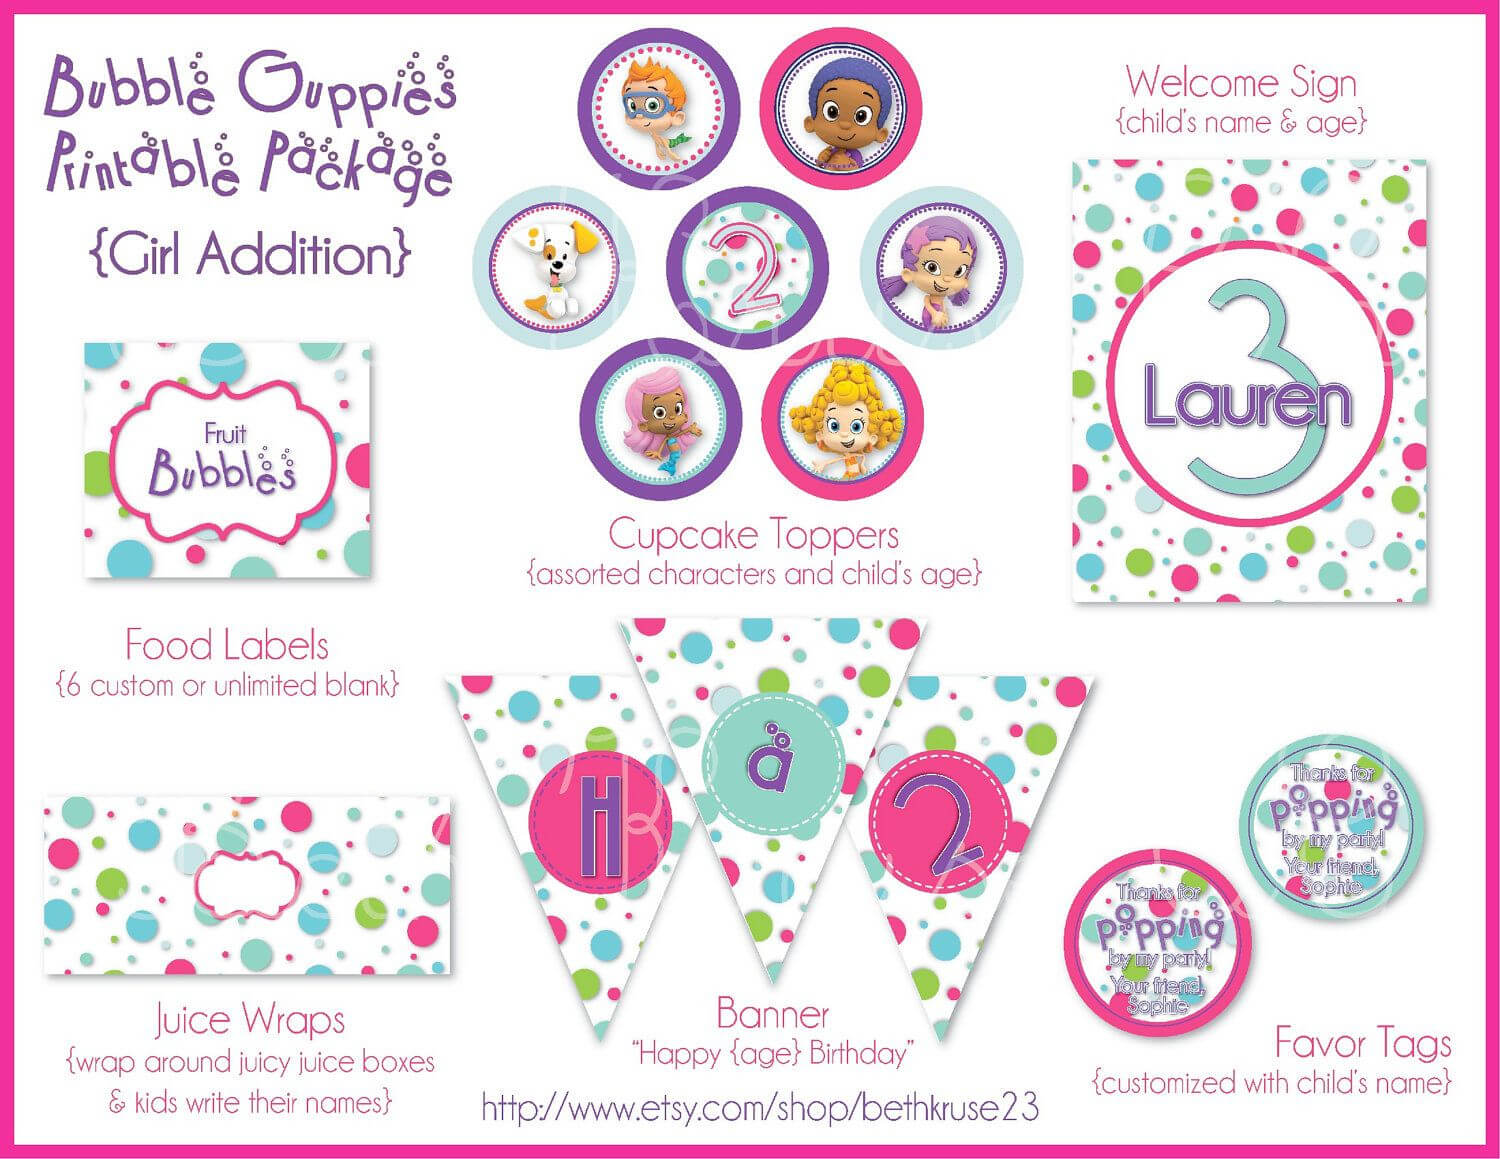 Girl Bubble Guppies Printable Party Package. $25.00, Via Intended For Bubble Guppies Birthday Banner Template